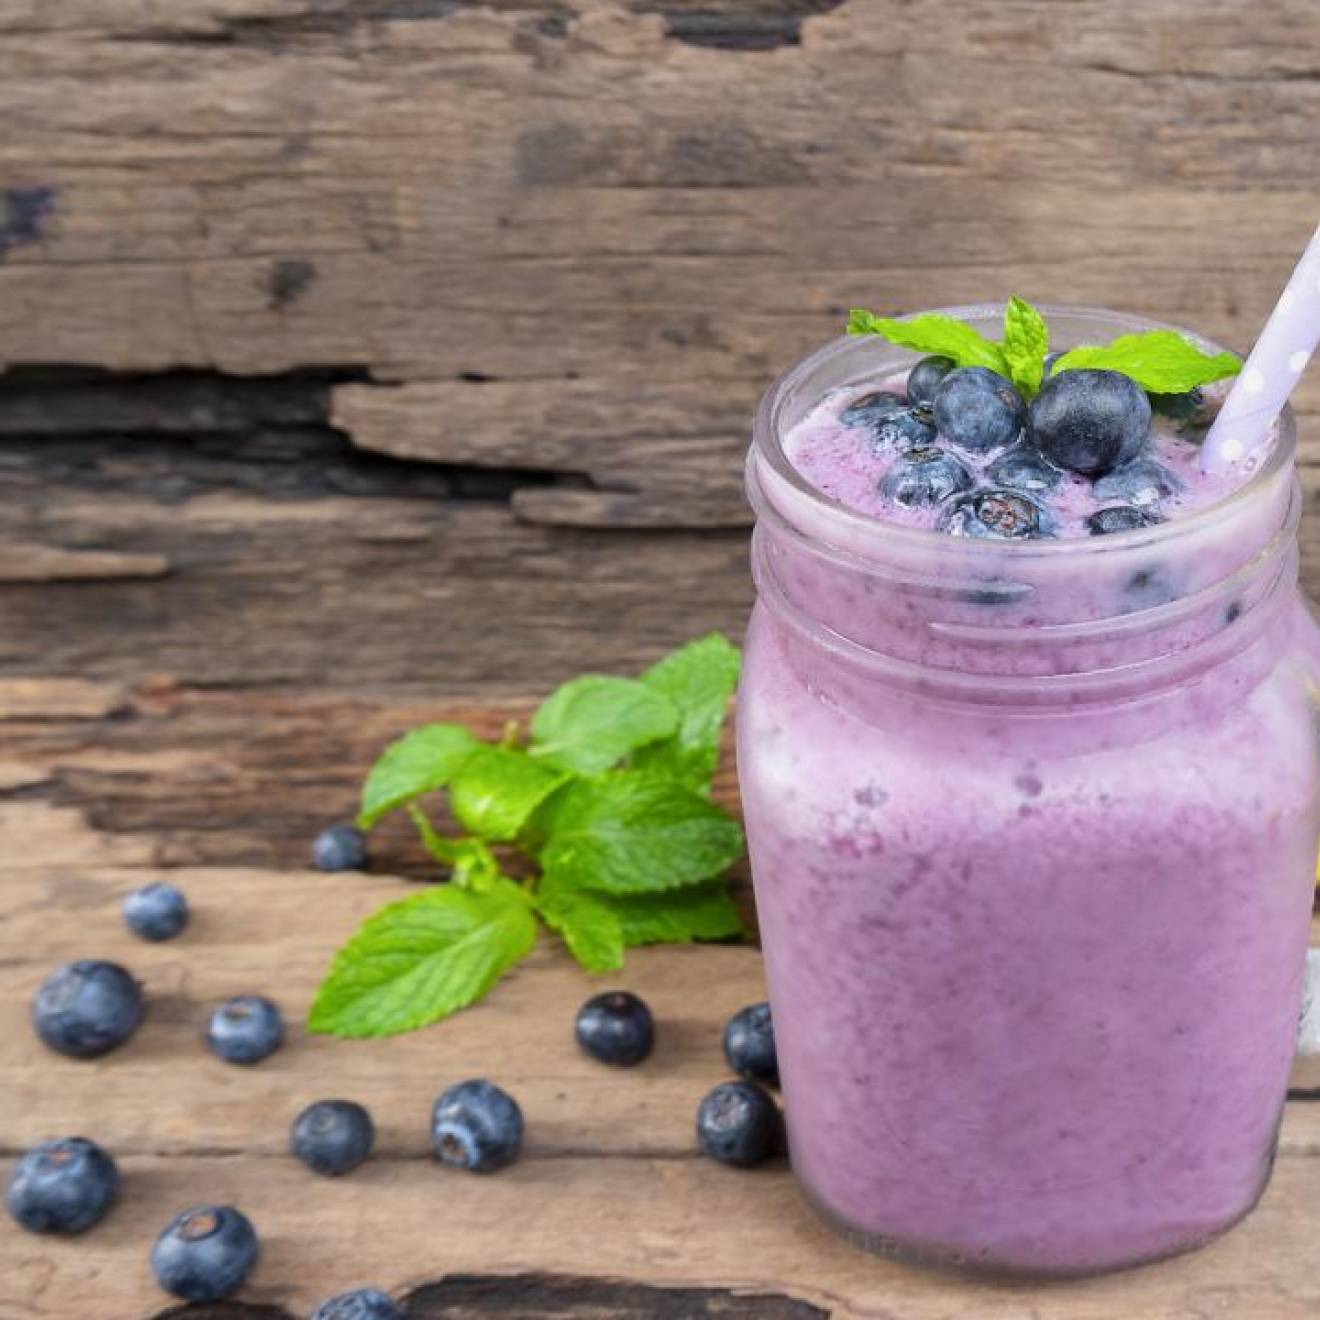 A purple smoothie with blueberries and a banana next to it on a table